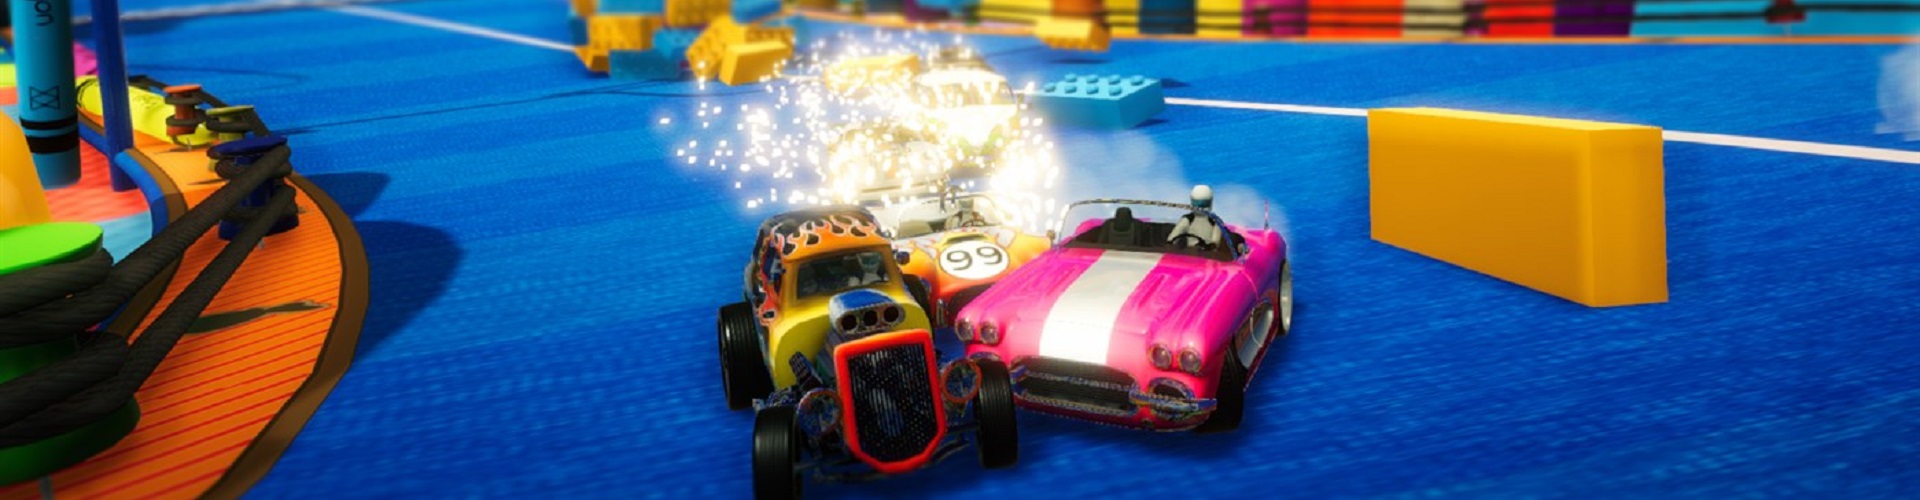 toy car games to play